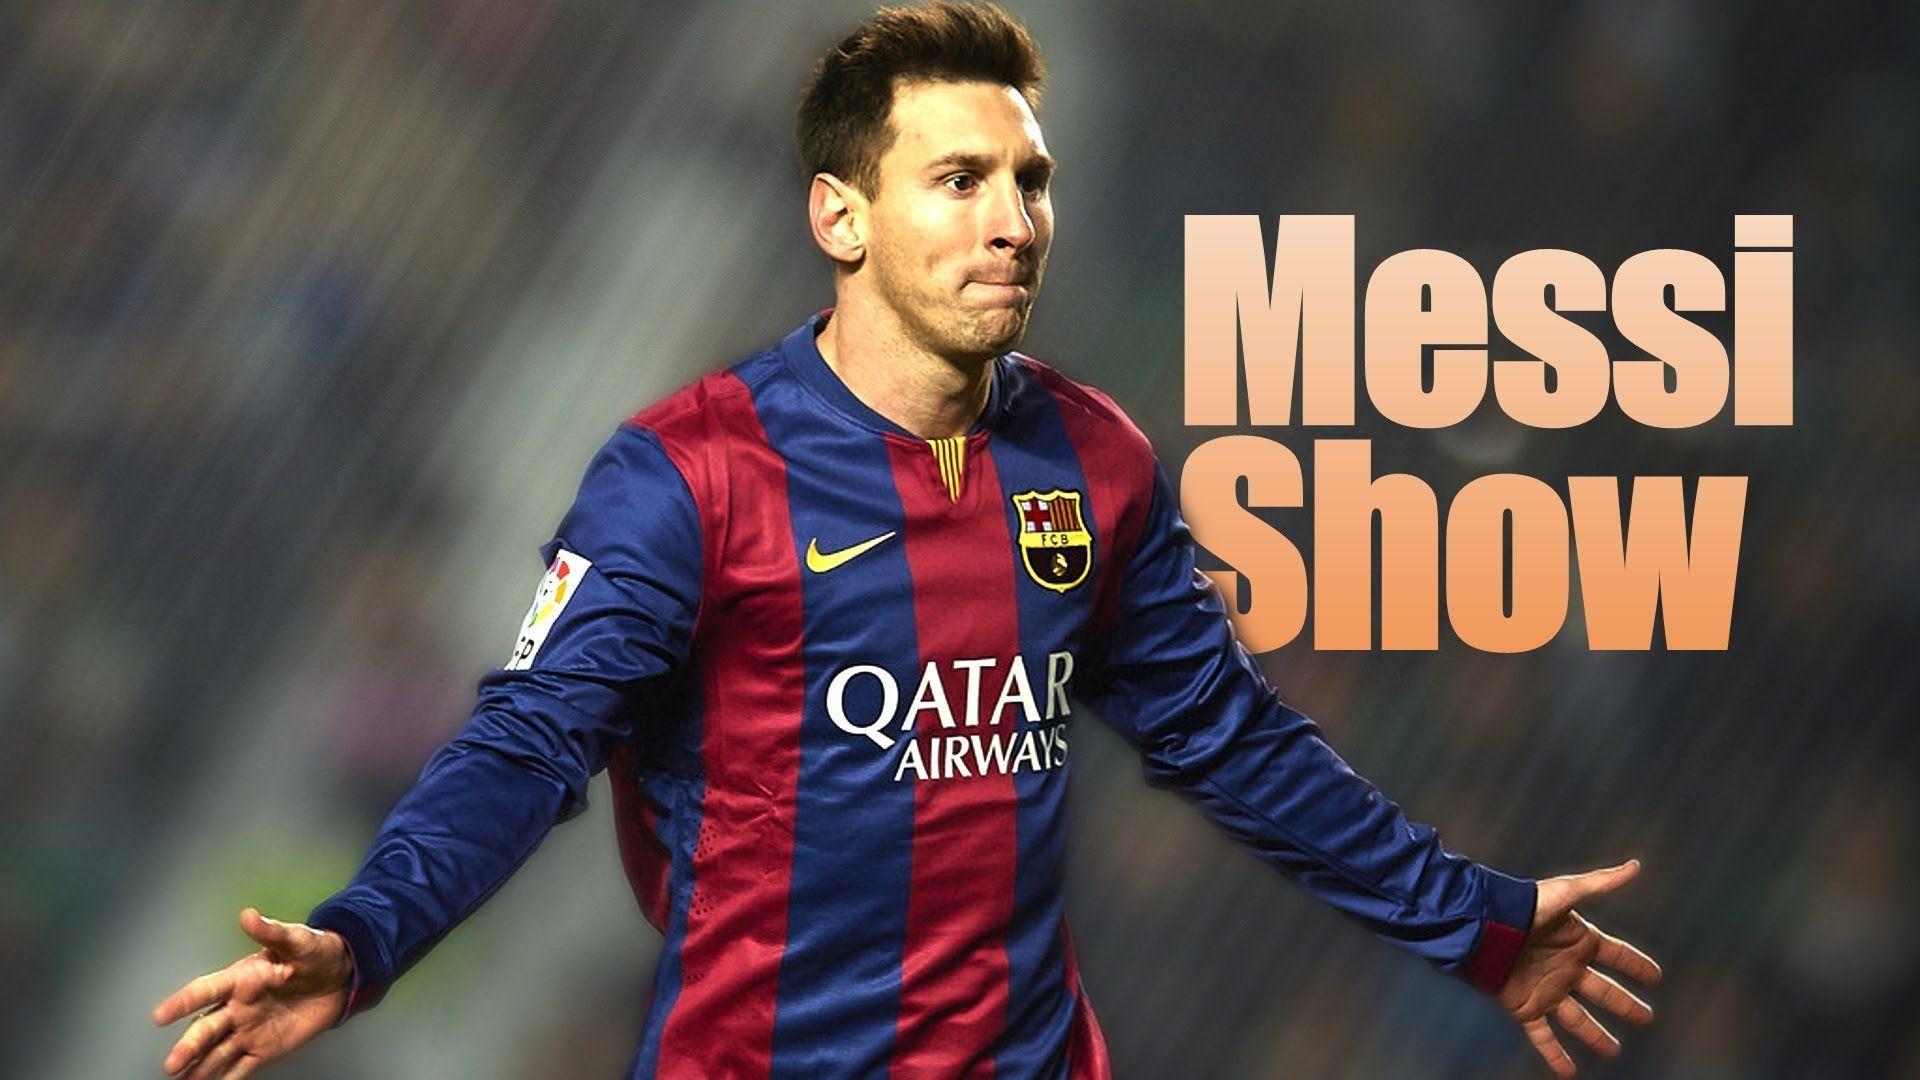 Messi HD Wallpapers 1080p 2016